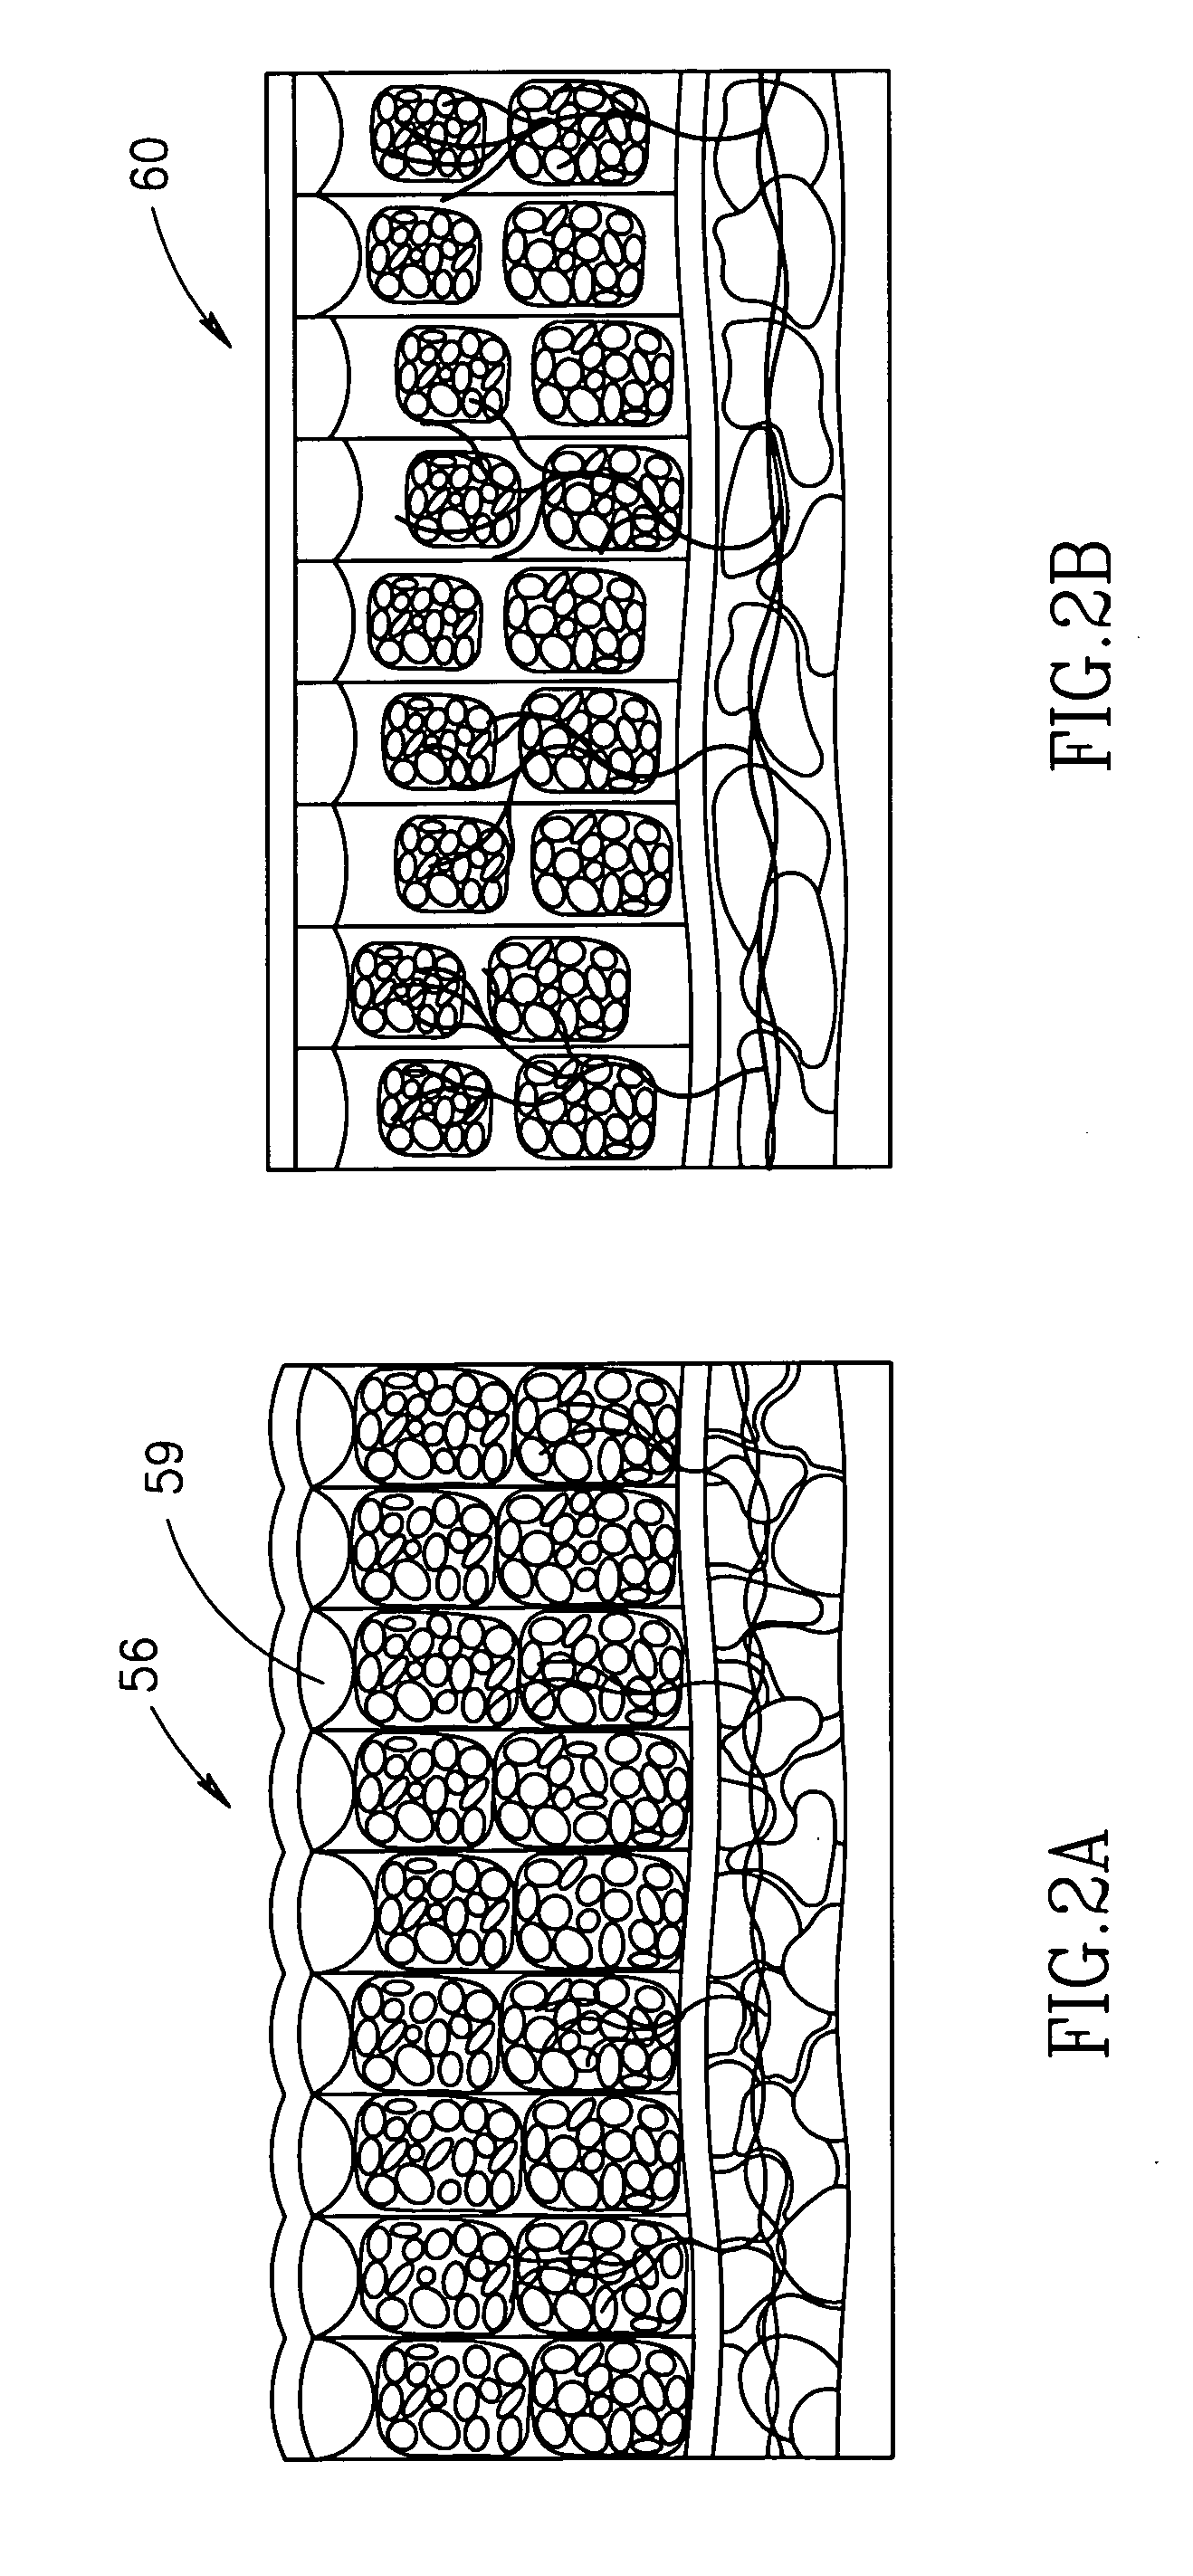 Method for reducing the appearance of skin cellulites using vacuum radiant heat and mechanical manipulation